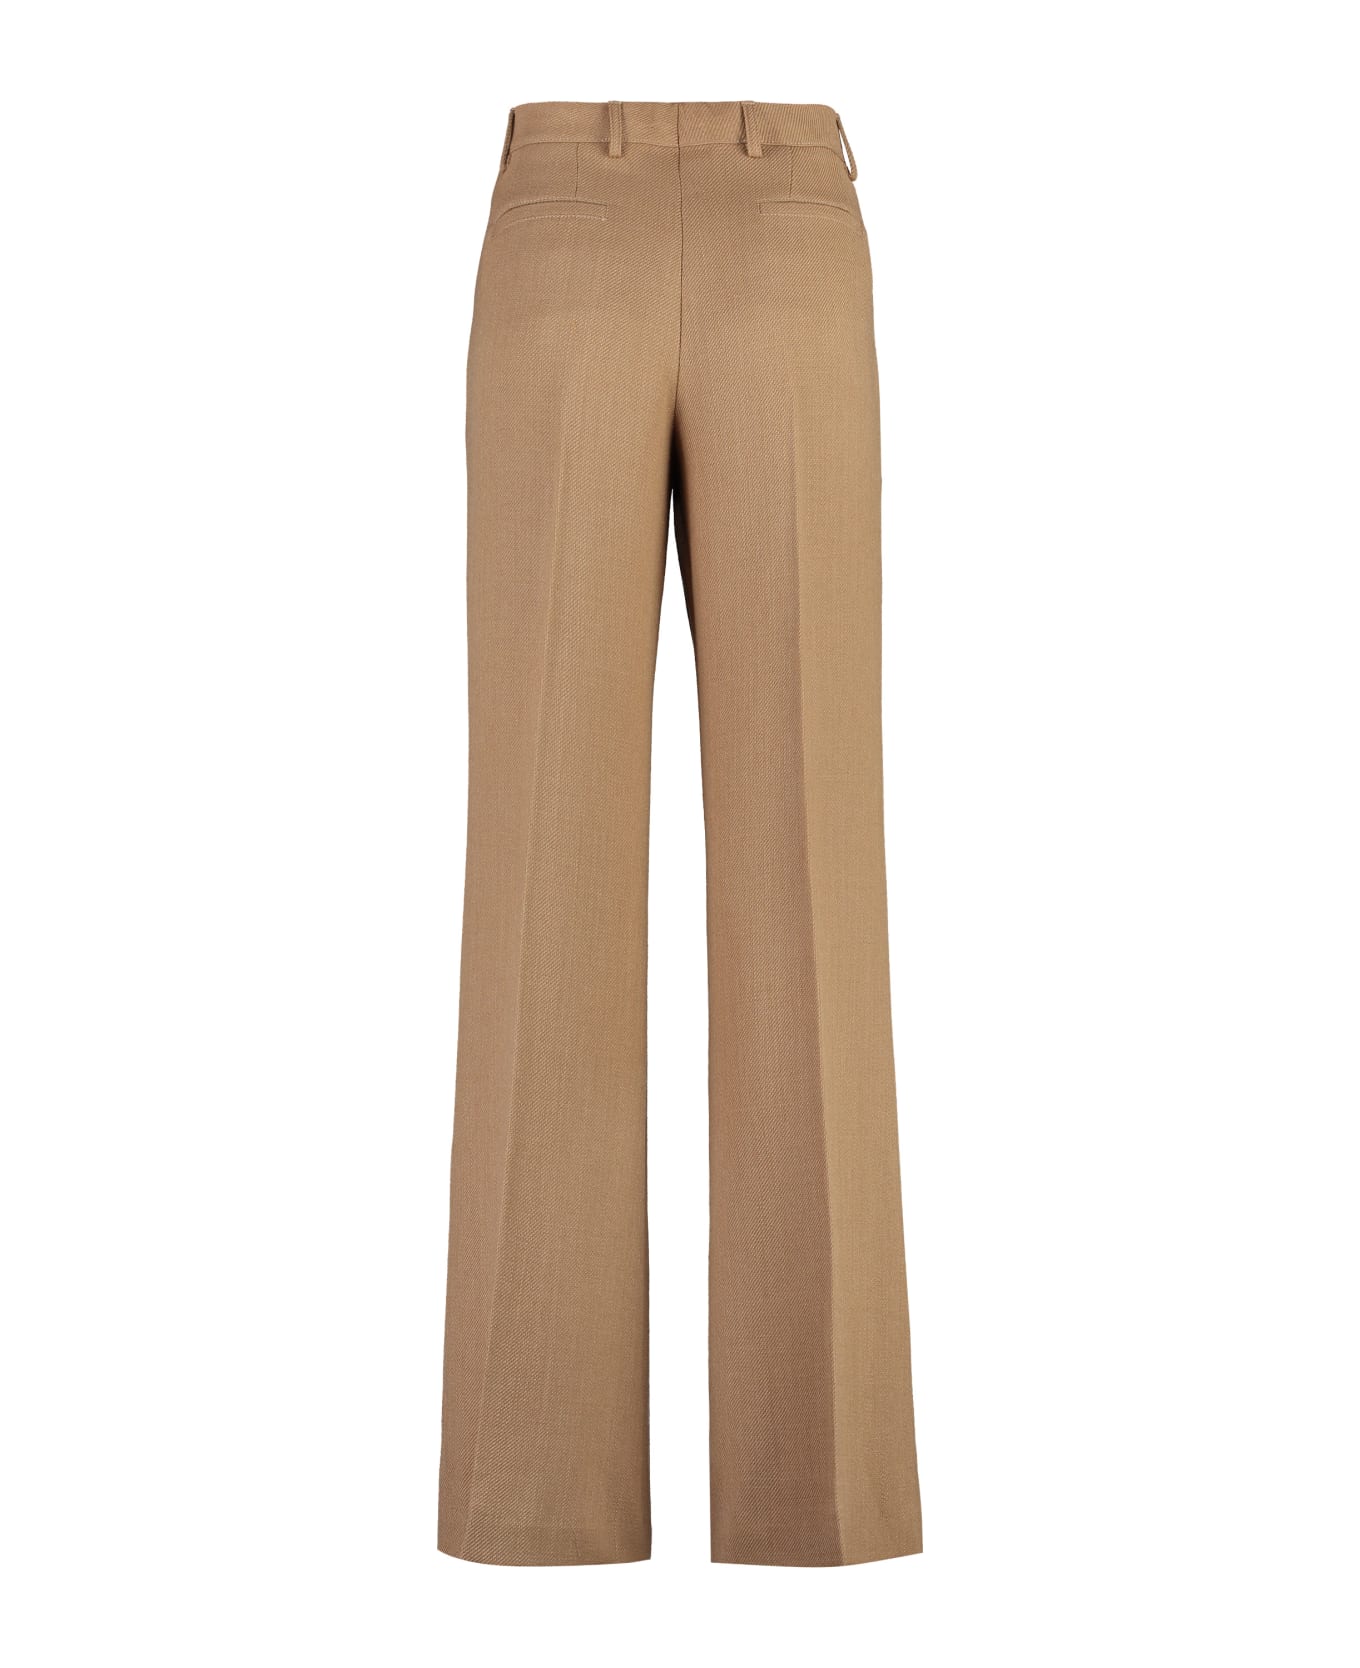 Etro Flared Trousers - Beige